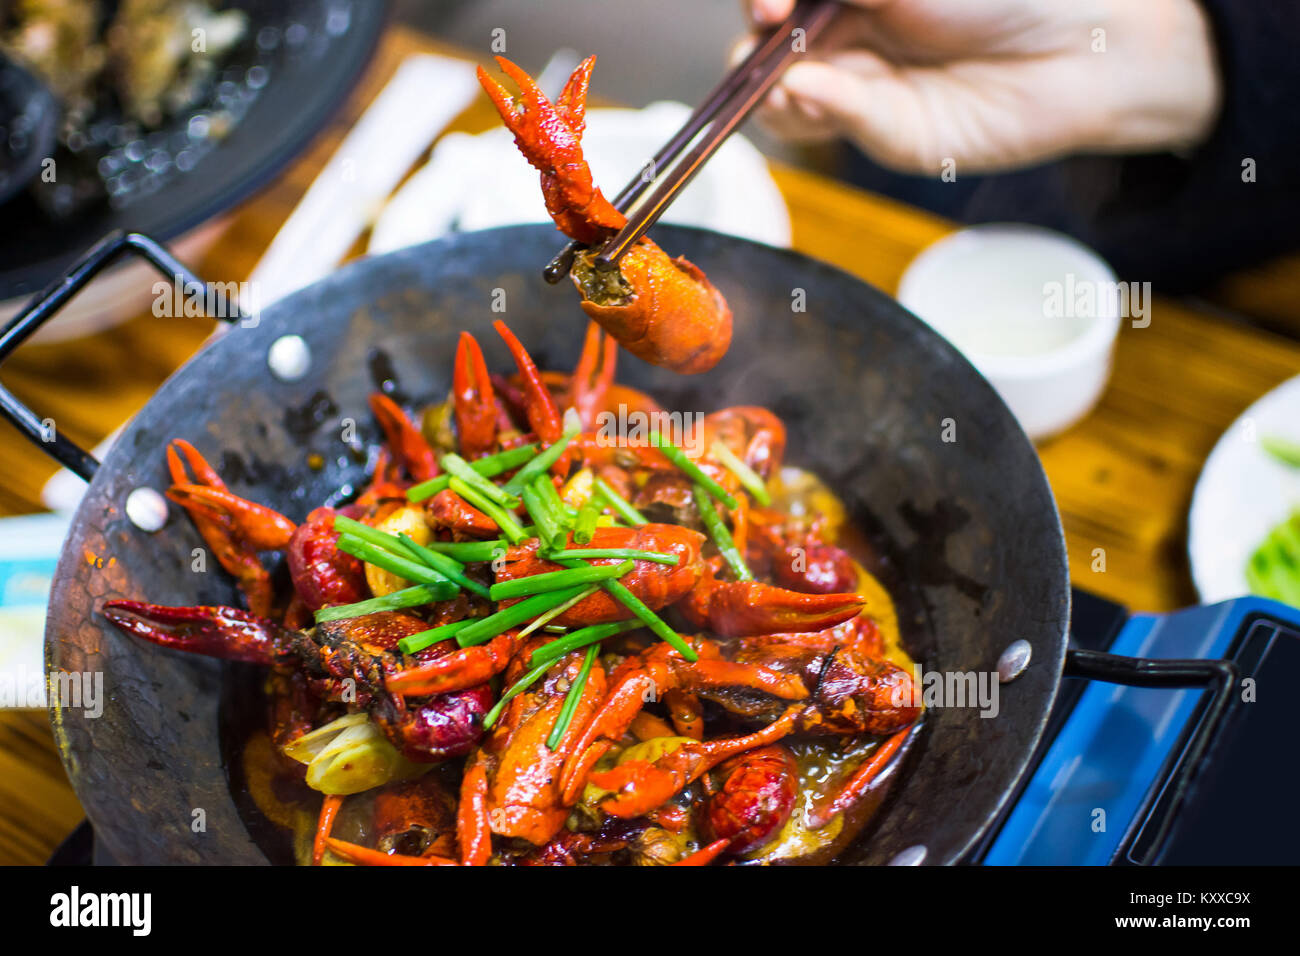 Chopsticks taking crayfish from spicy crayfish pot on the table Stock Photo